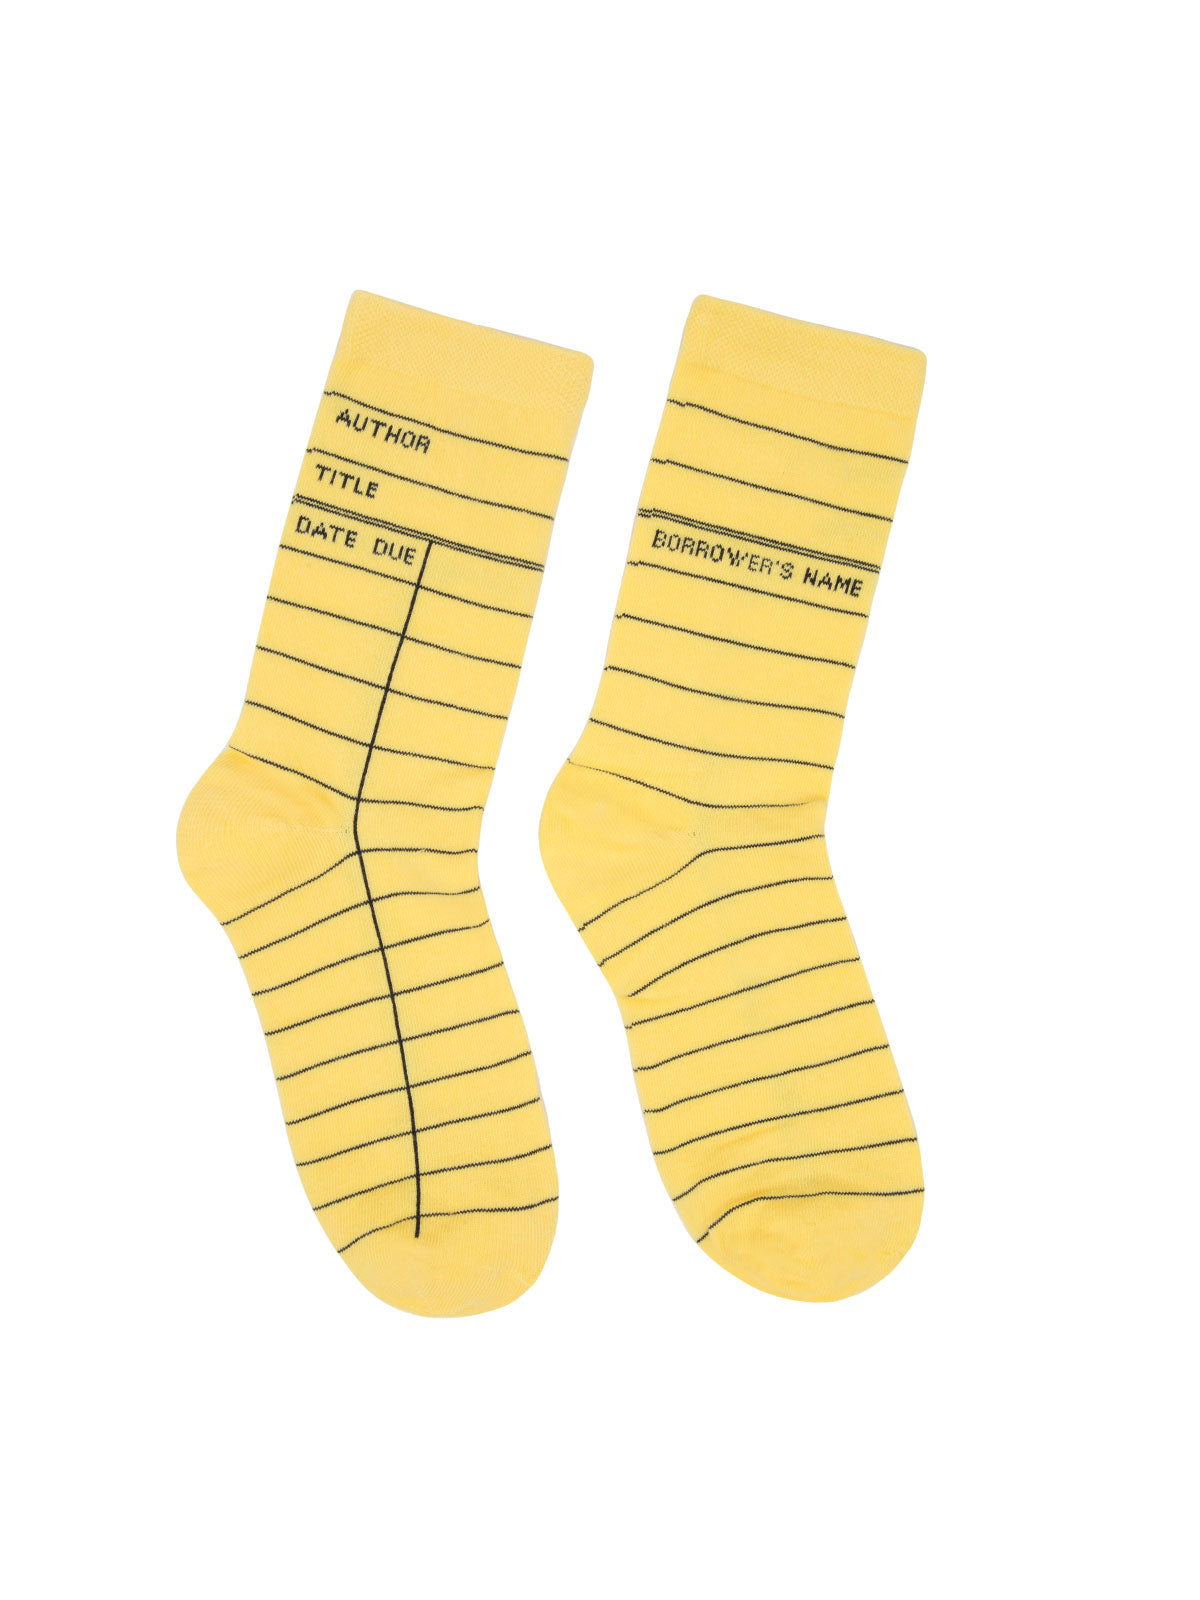 Library Card yellow socks — Out of Print